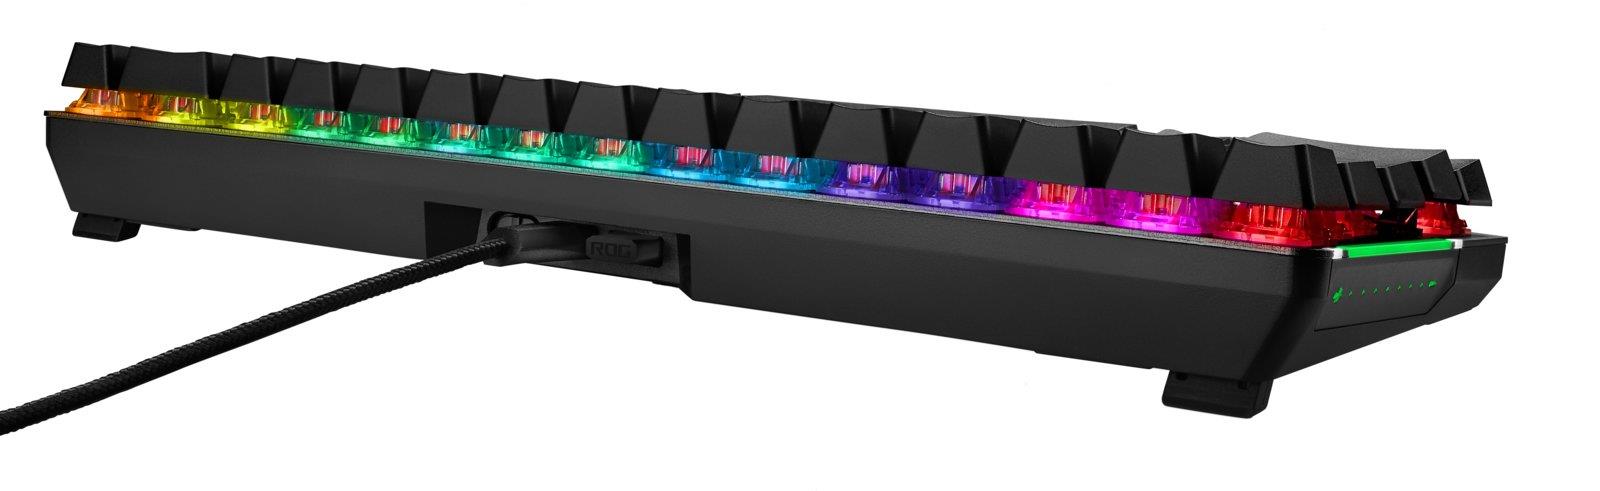 ASUS ROG FALCHION Wireless Mechanical RGB Gaming Keyboard 65% form-factor (Cherry MX Red) thumbnail 3